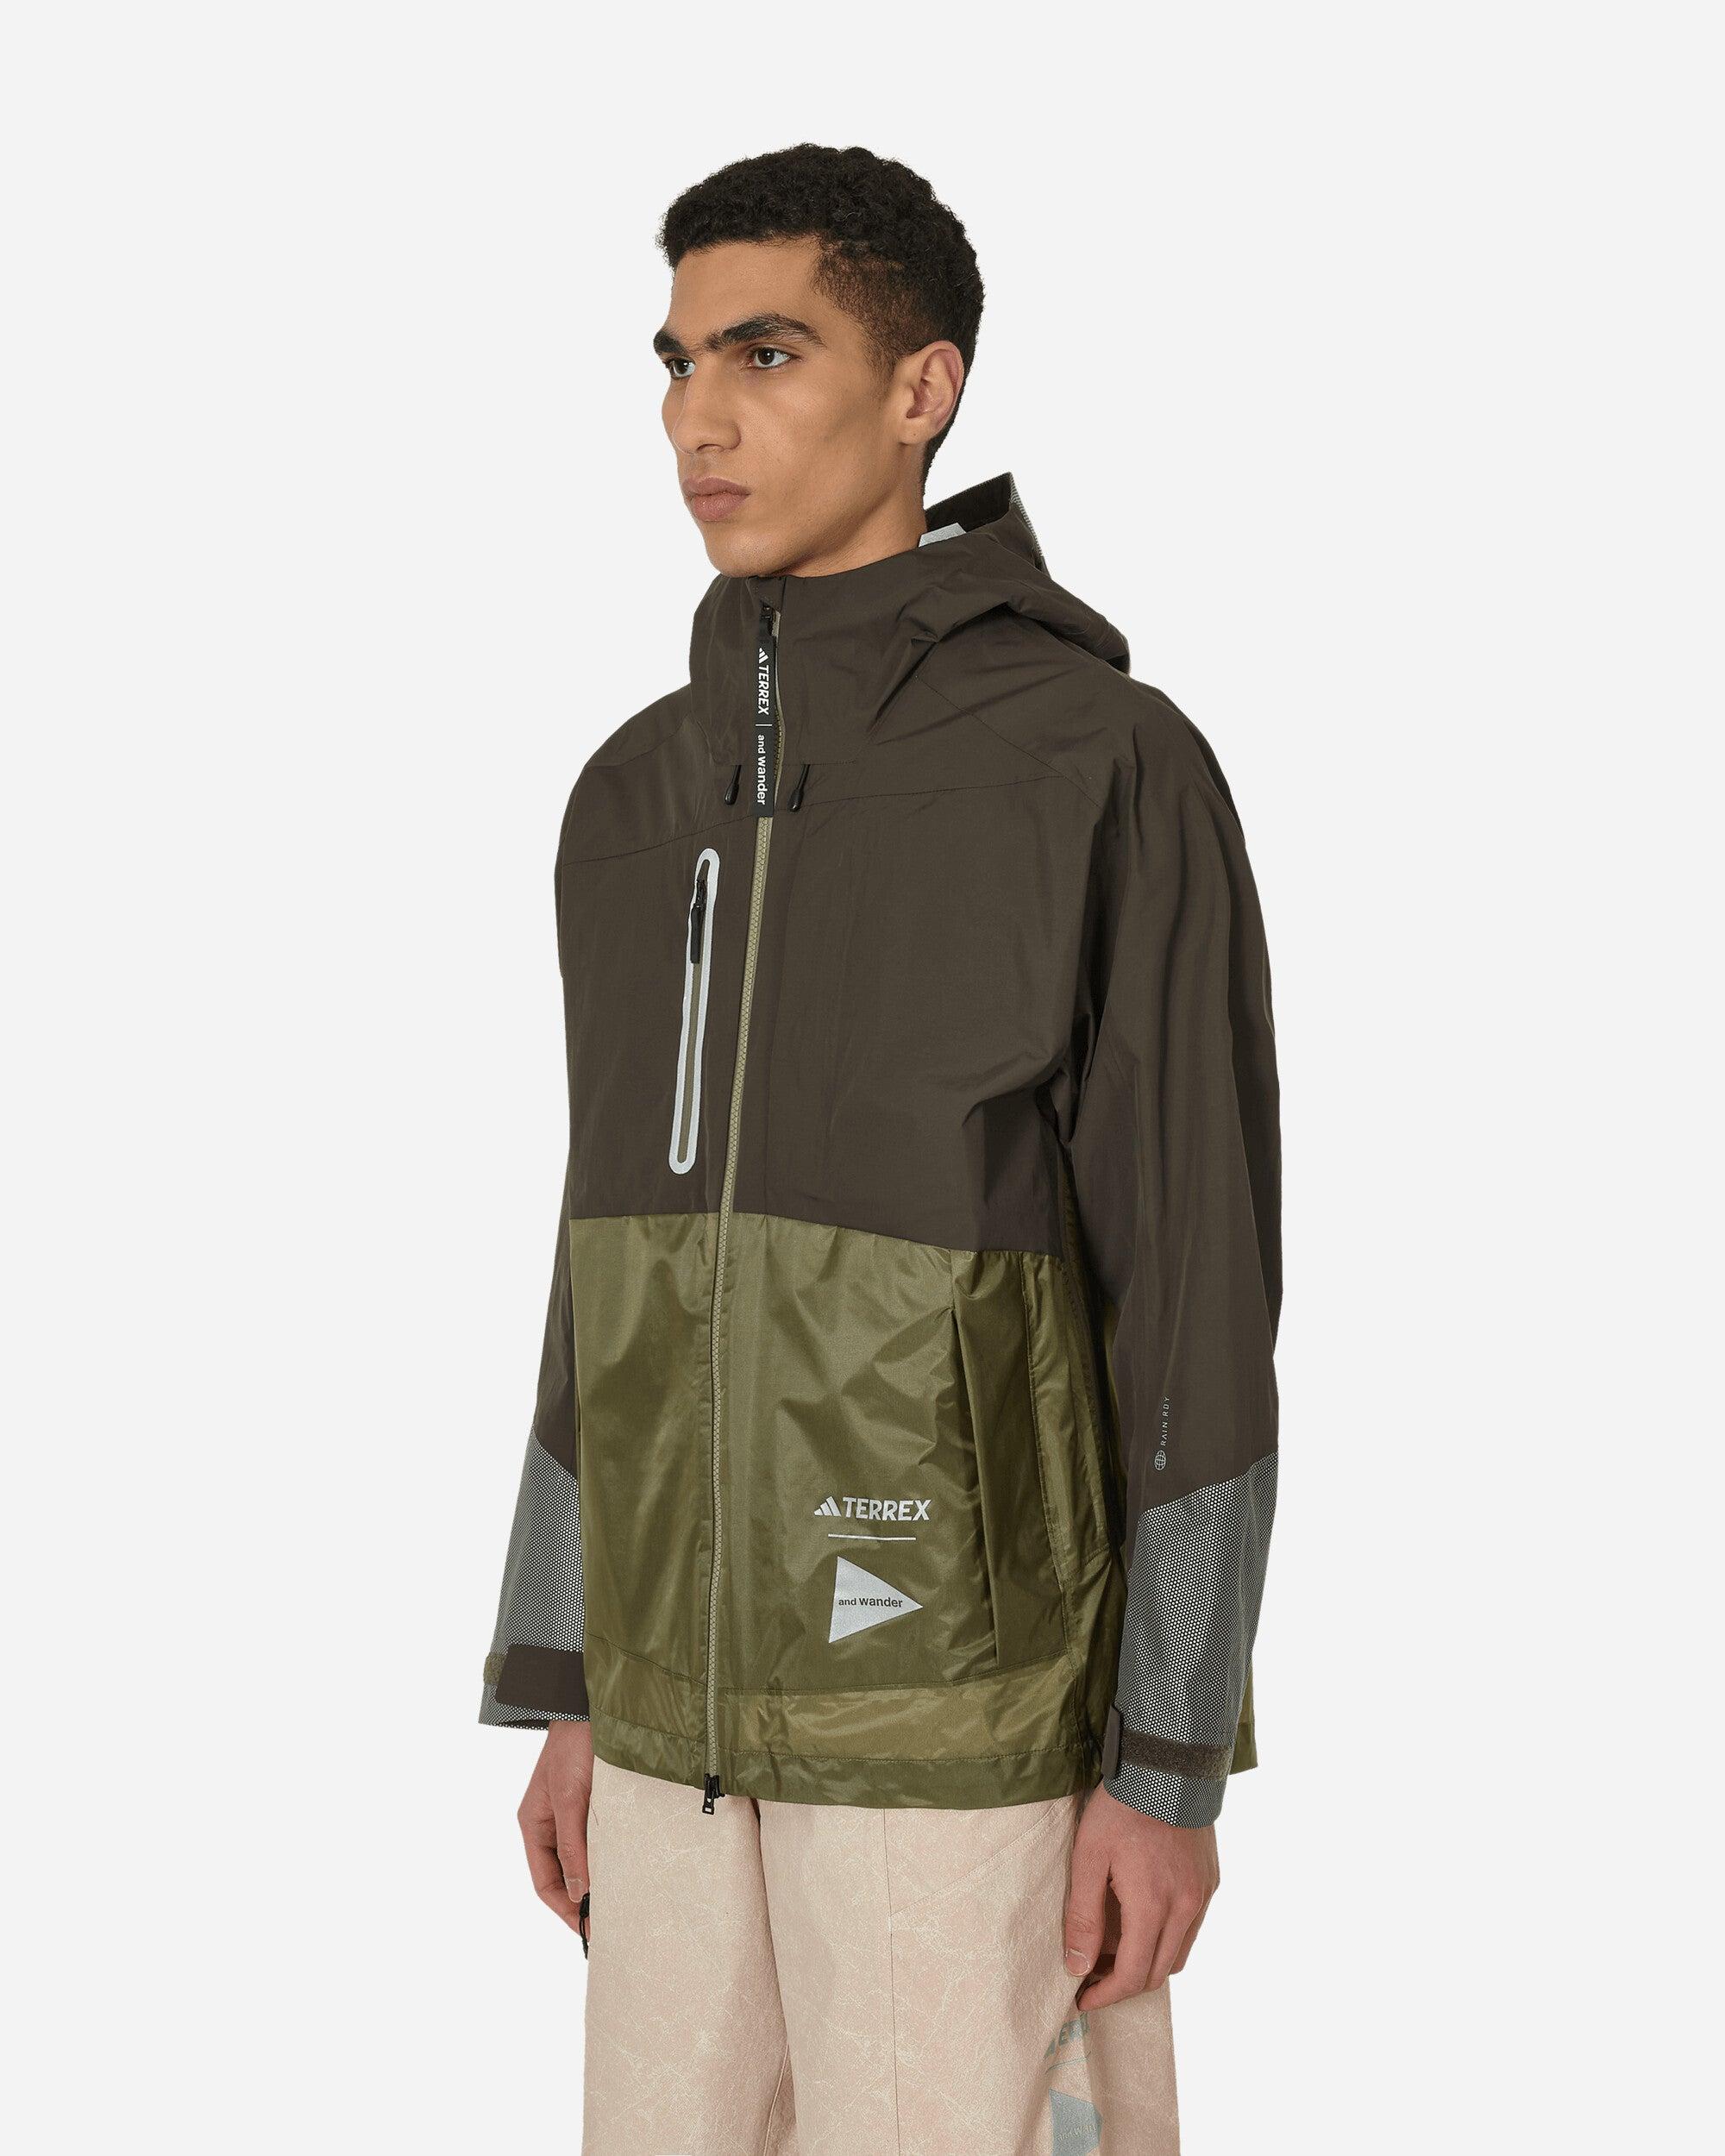 Adidas nude sage green jacket outerwear, Men's Fashion, Coats, Jackets and  Outerwear on Carousell